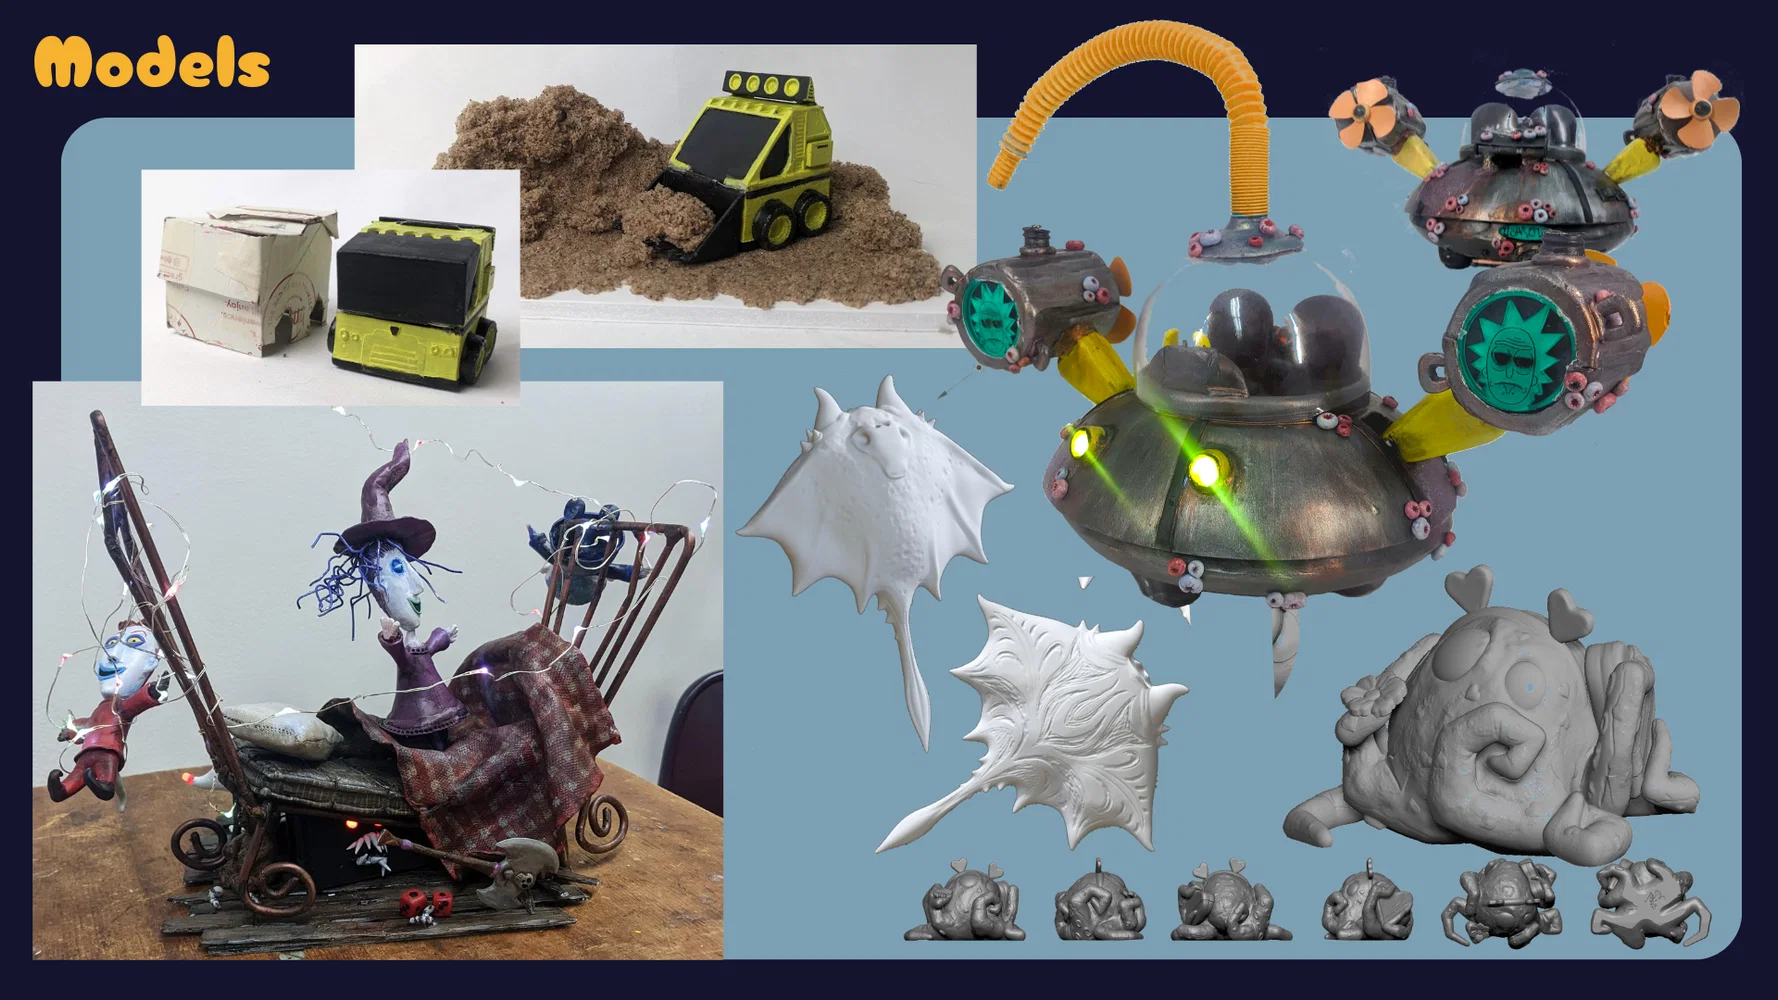 Portfolio page with models and 3D sculpts, silver space ship, yellow and black construction cubes, and aquatic sculpts 